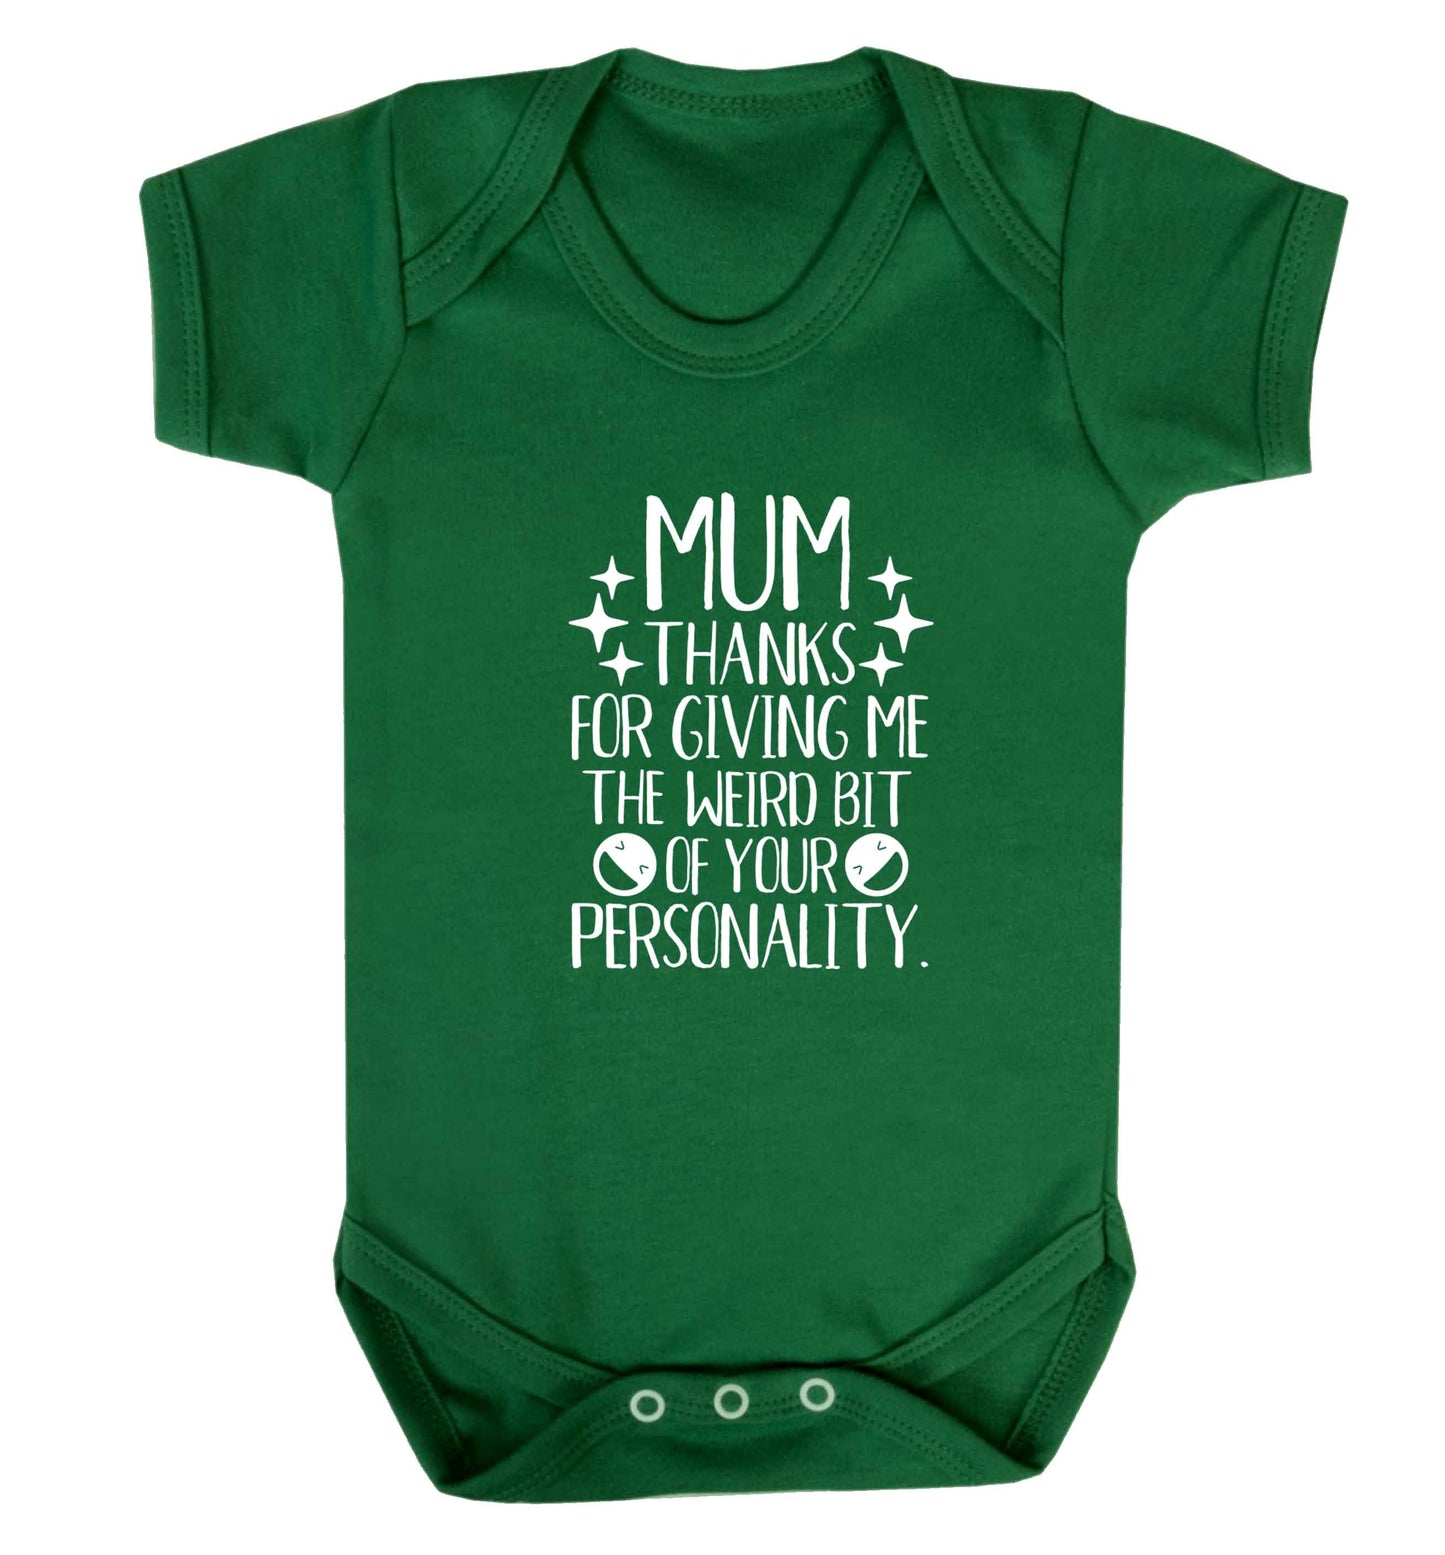 Mum thanks for giving me the weird bit of your personality baby vest green 18-24 months